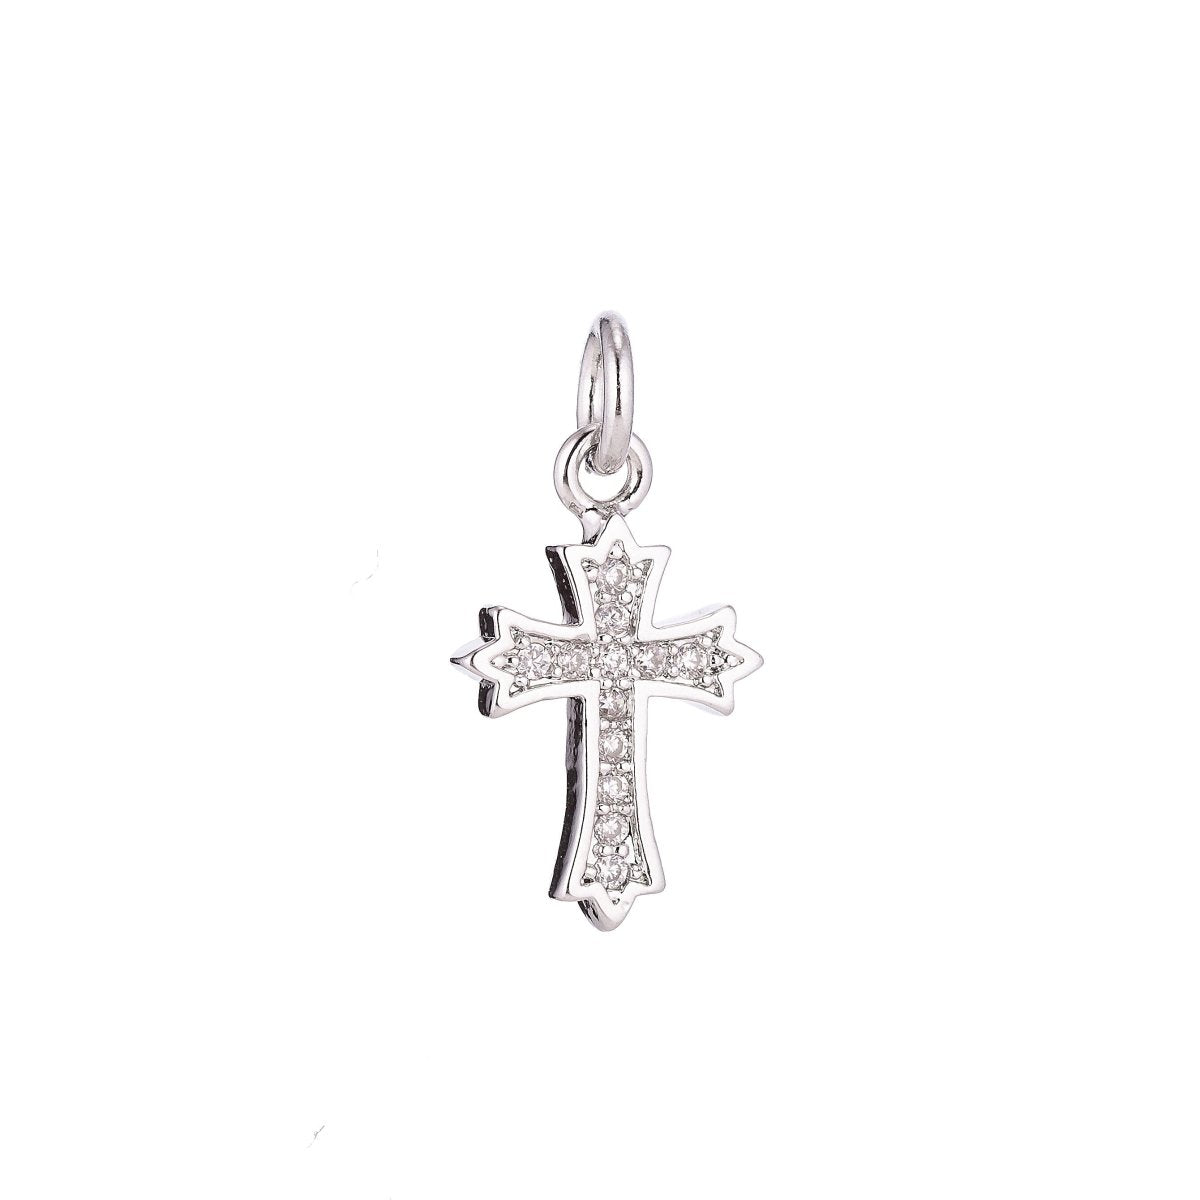 Gold Filled Ornate Cross Catholic Christian Religious Cubic Zirconia Necklace Pendant Bracelet Earring Charm for Jewelry Making C-069 - DLUXCA